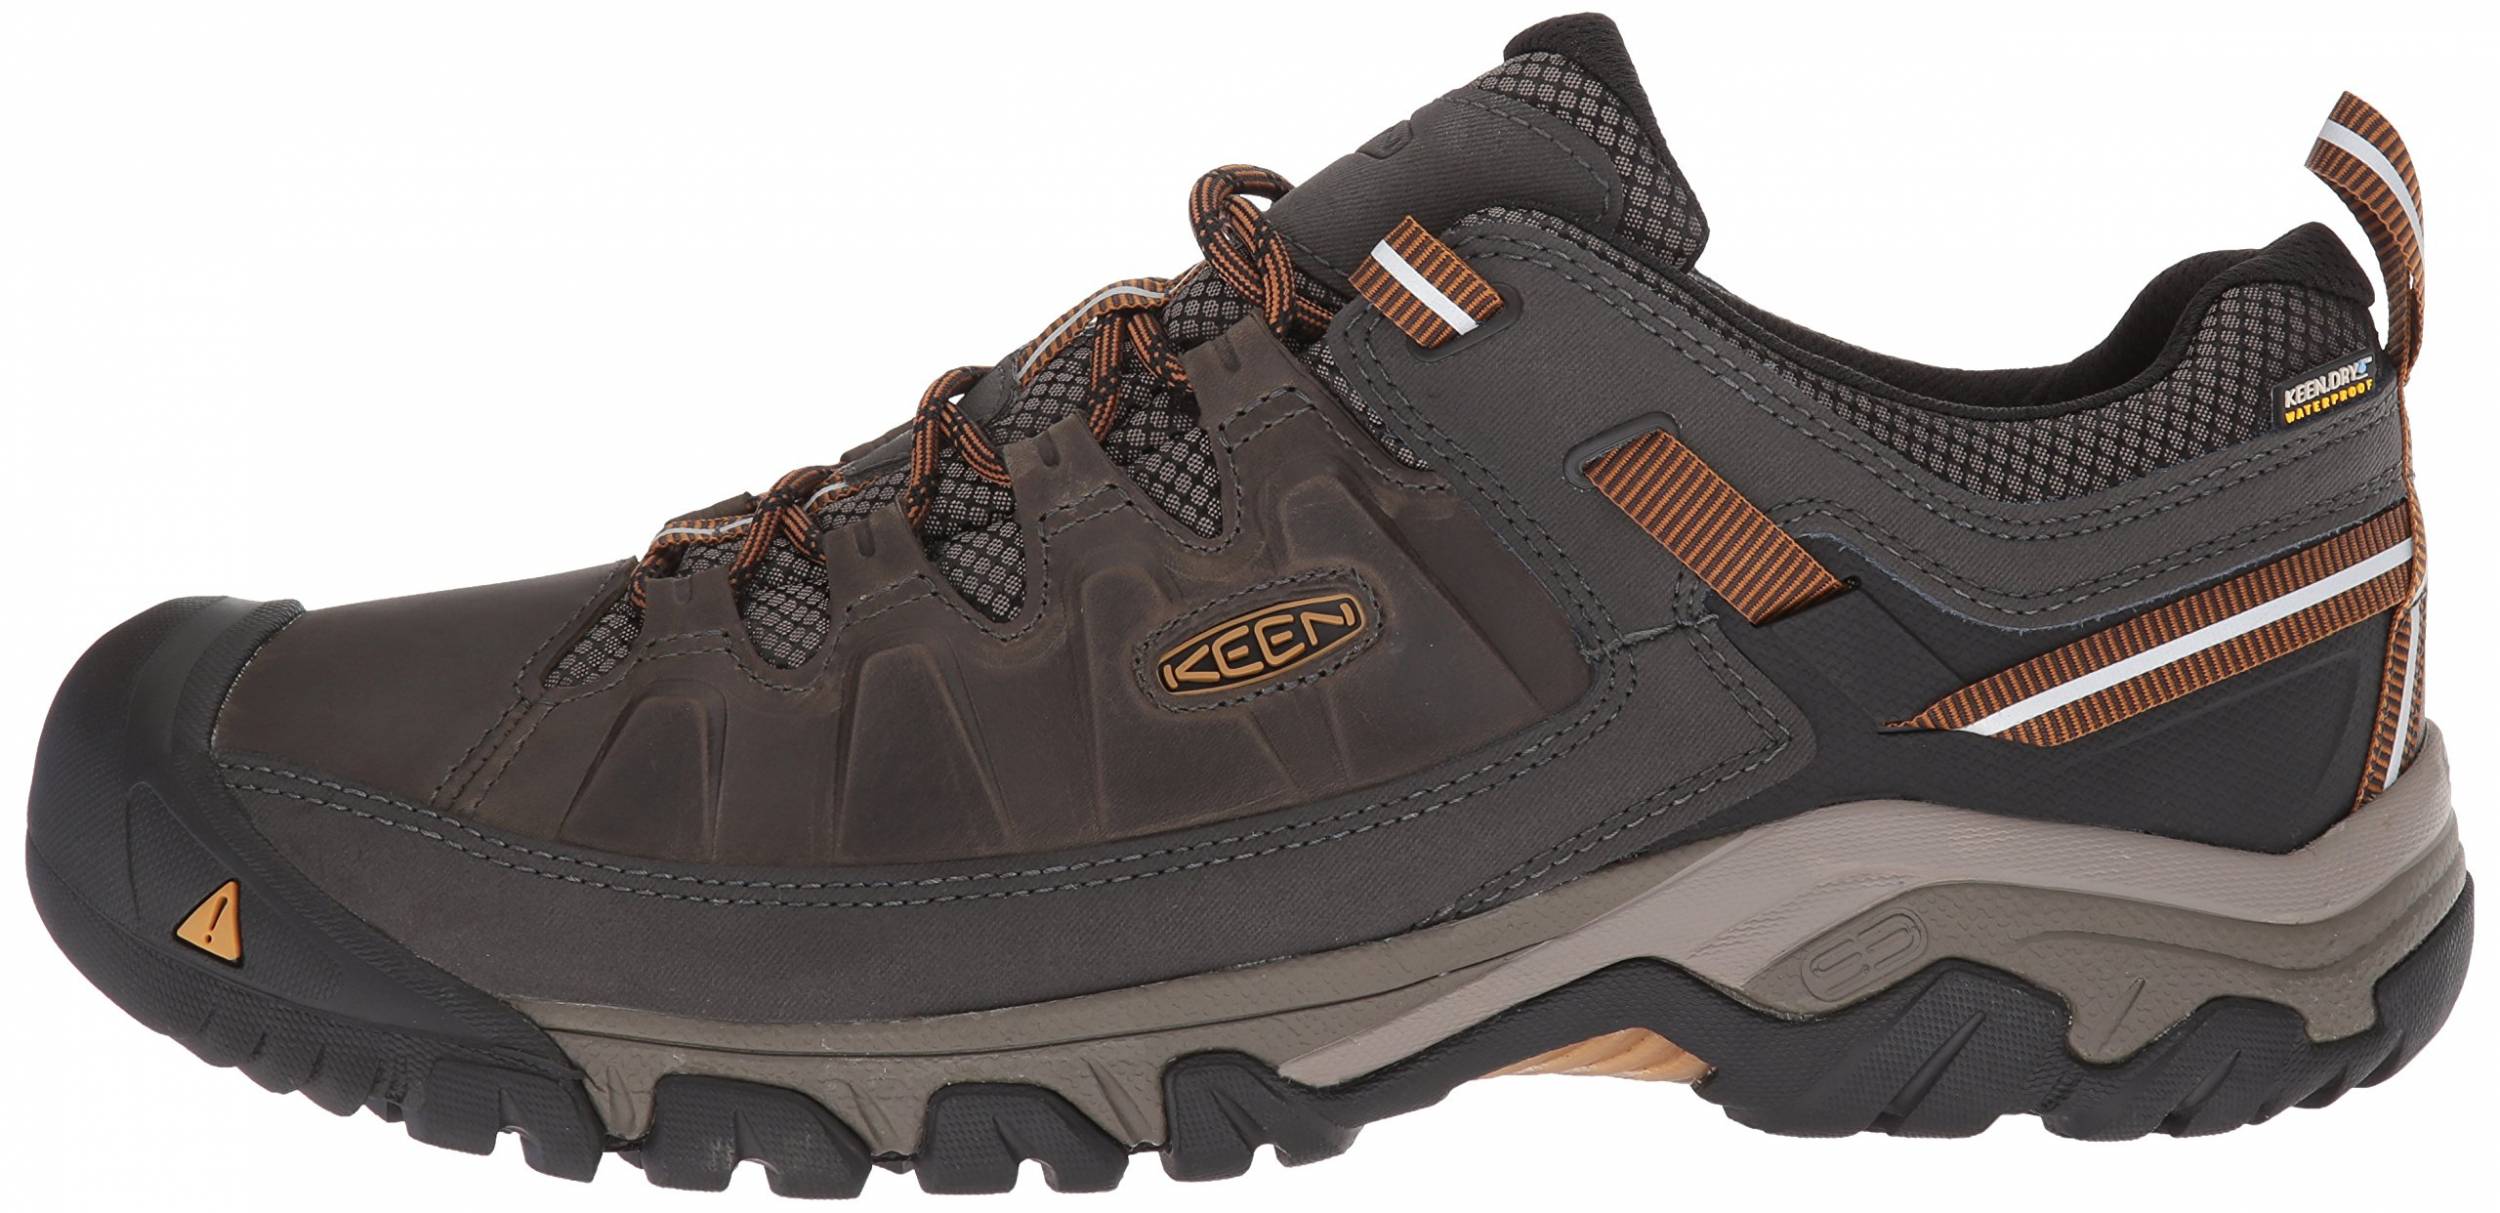 Save 25% on Waterproof Hiking Shoes 